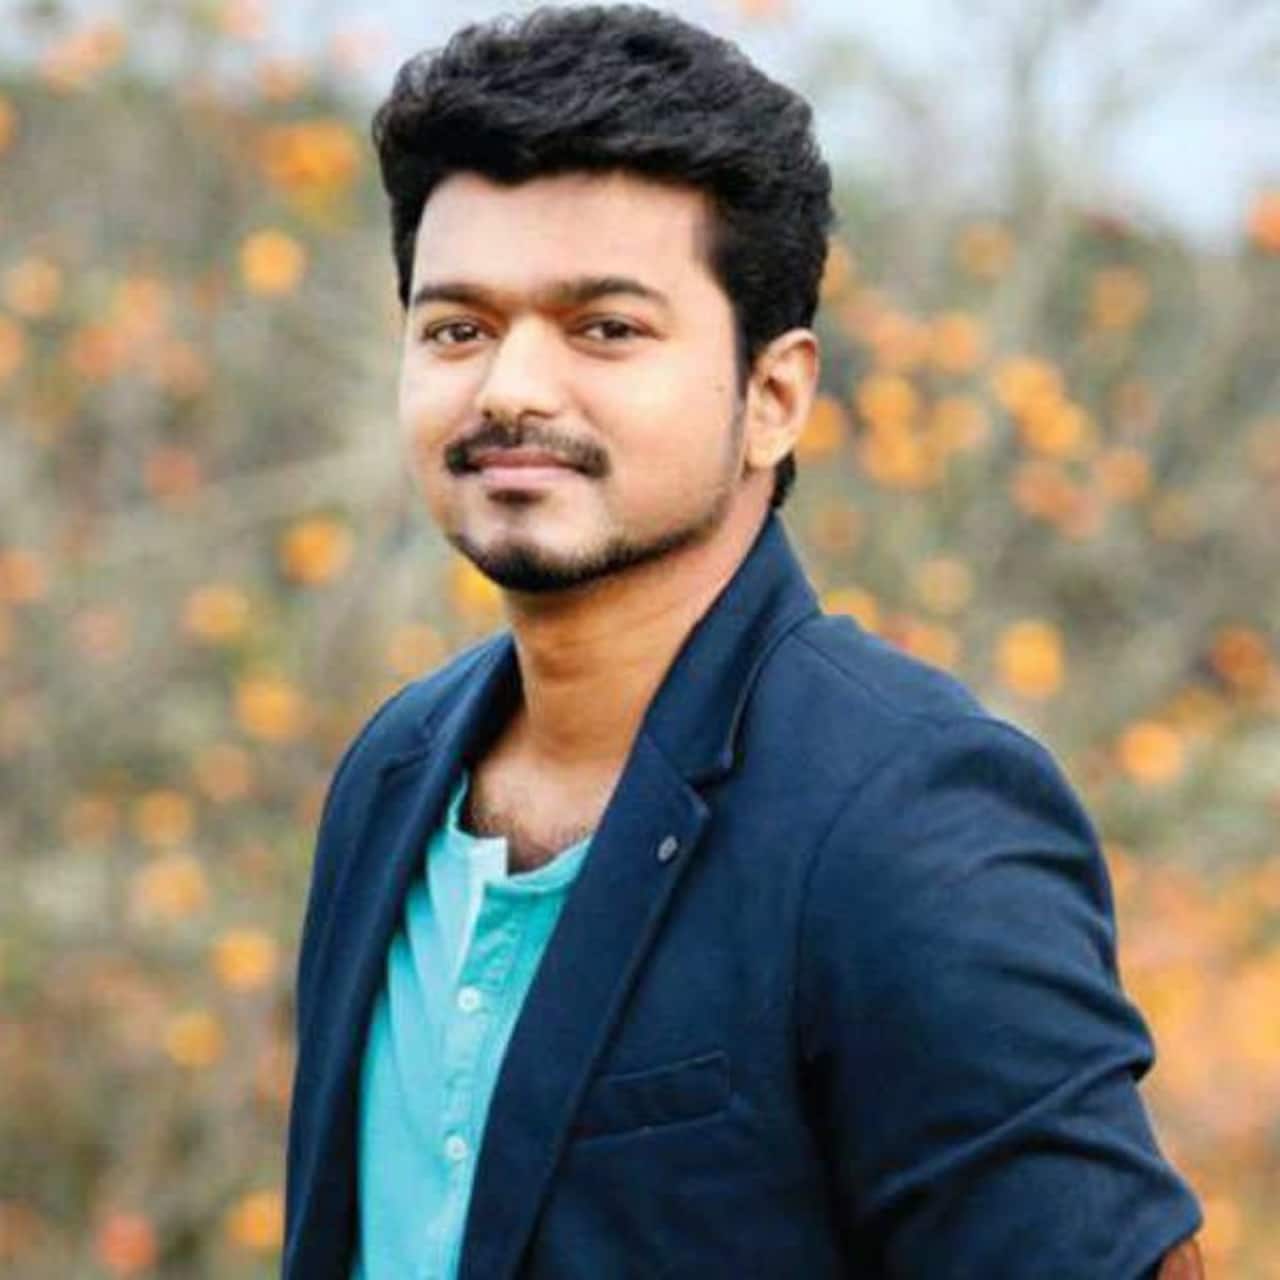 We know how grand is Thalapathy Vijay's popularity with this Twitter trend  that has picked up like wildfire - Bollywood News & Gossip, Movie Reviews,  Trailers & Videos at 